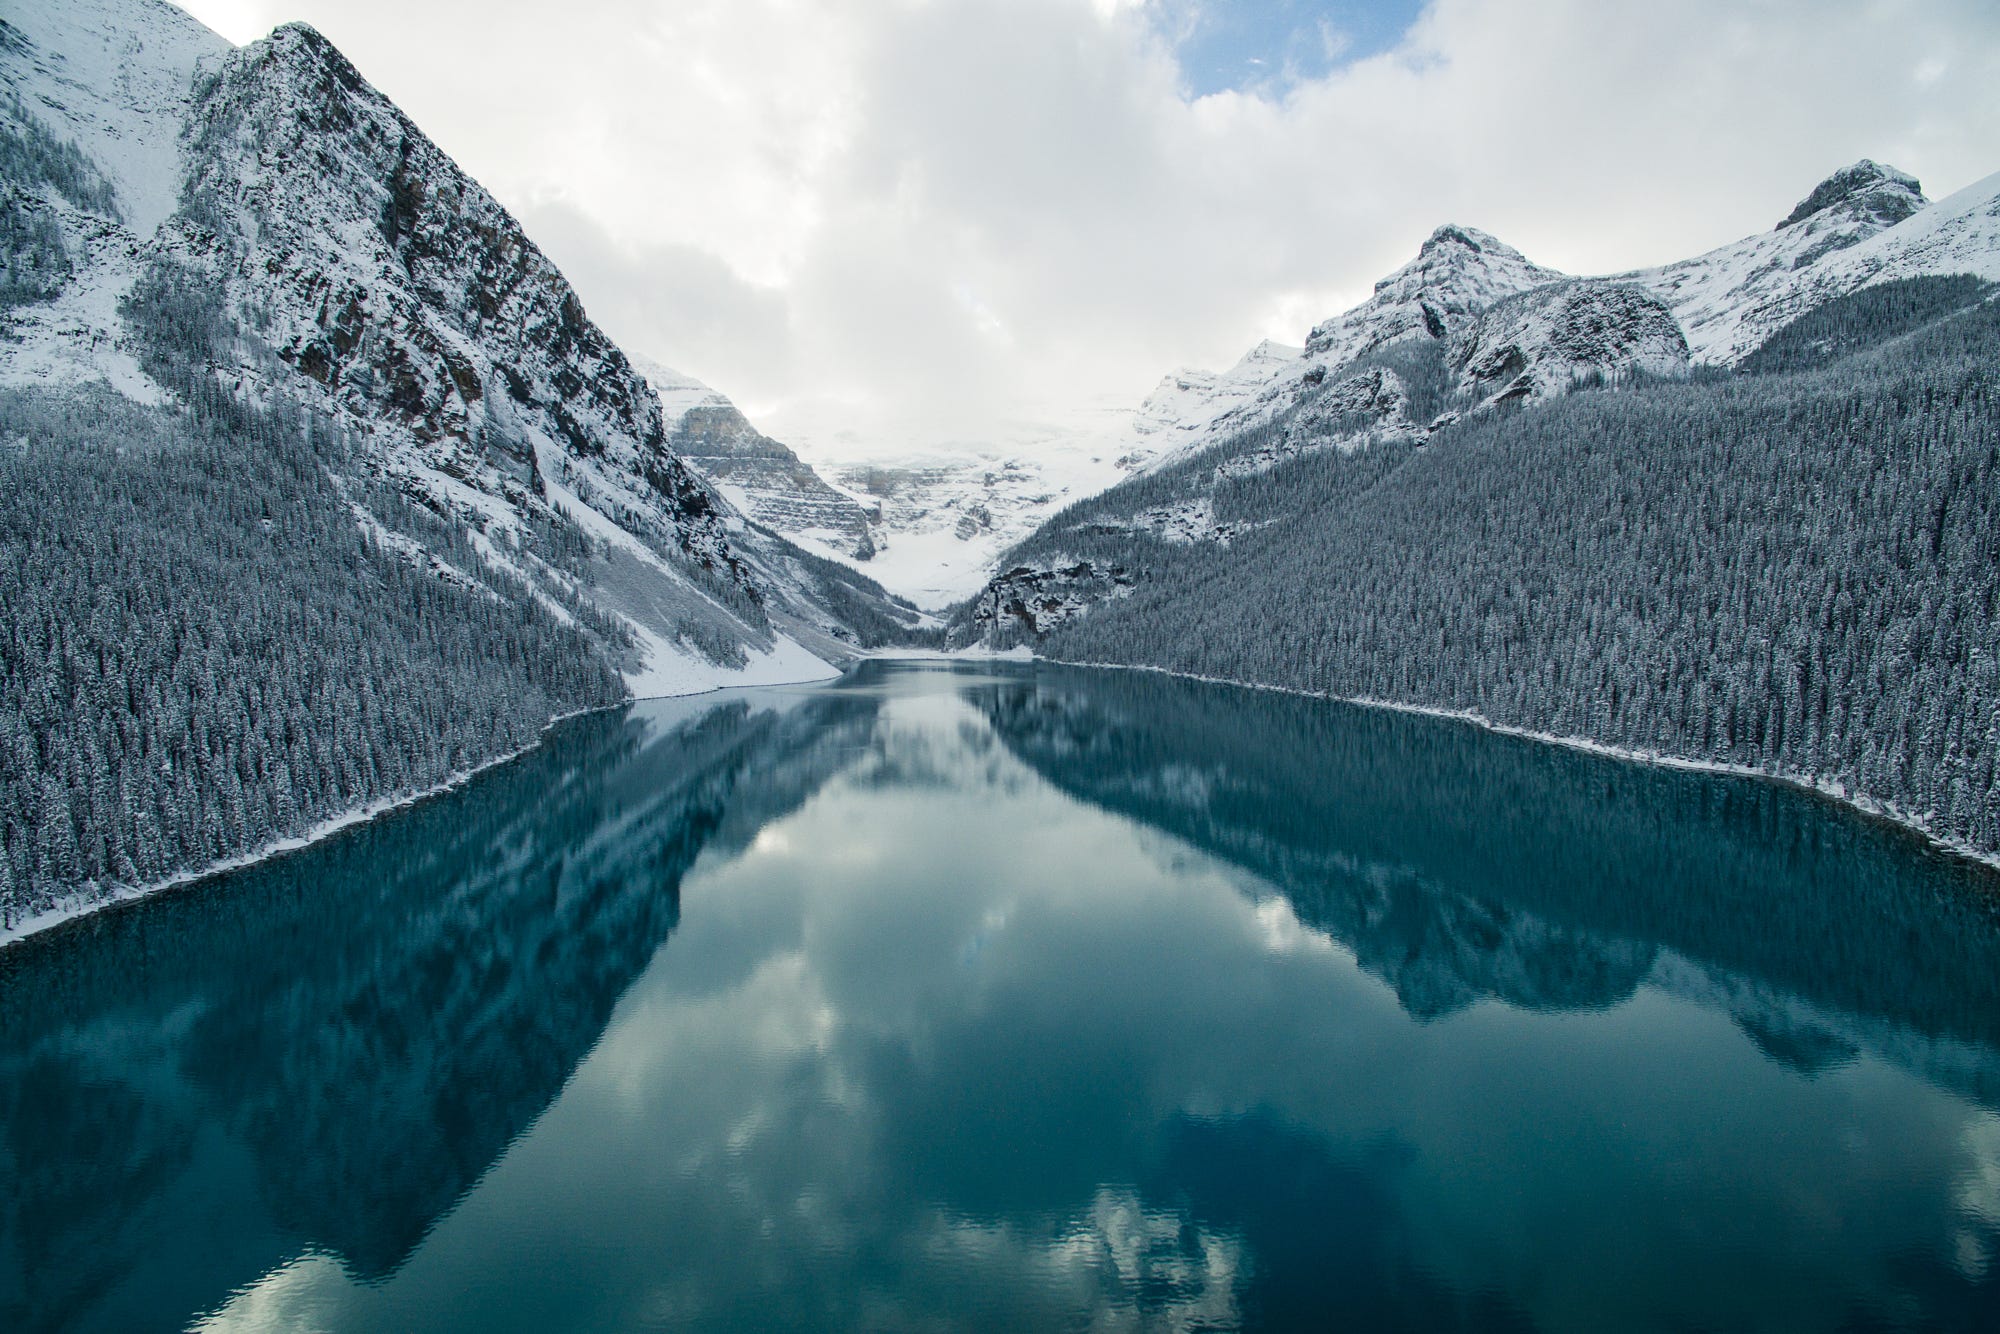 General 2000x1334 nature landscape winter Lake Louise Canada mountains lake reflection clouds